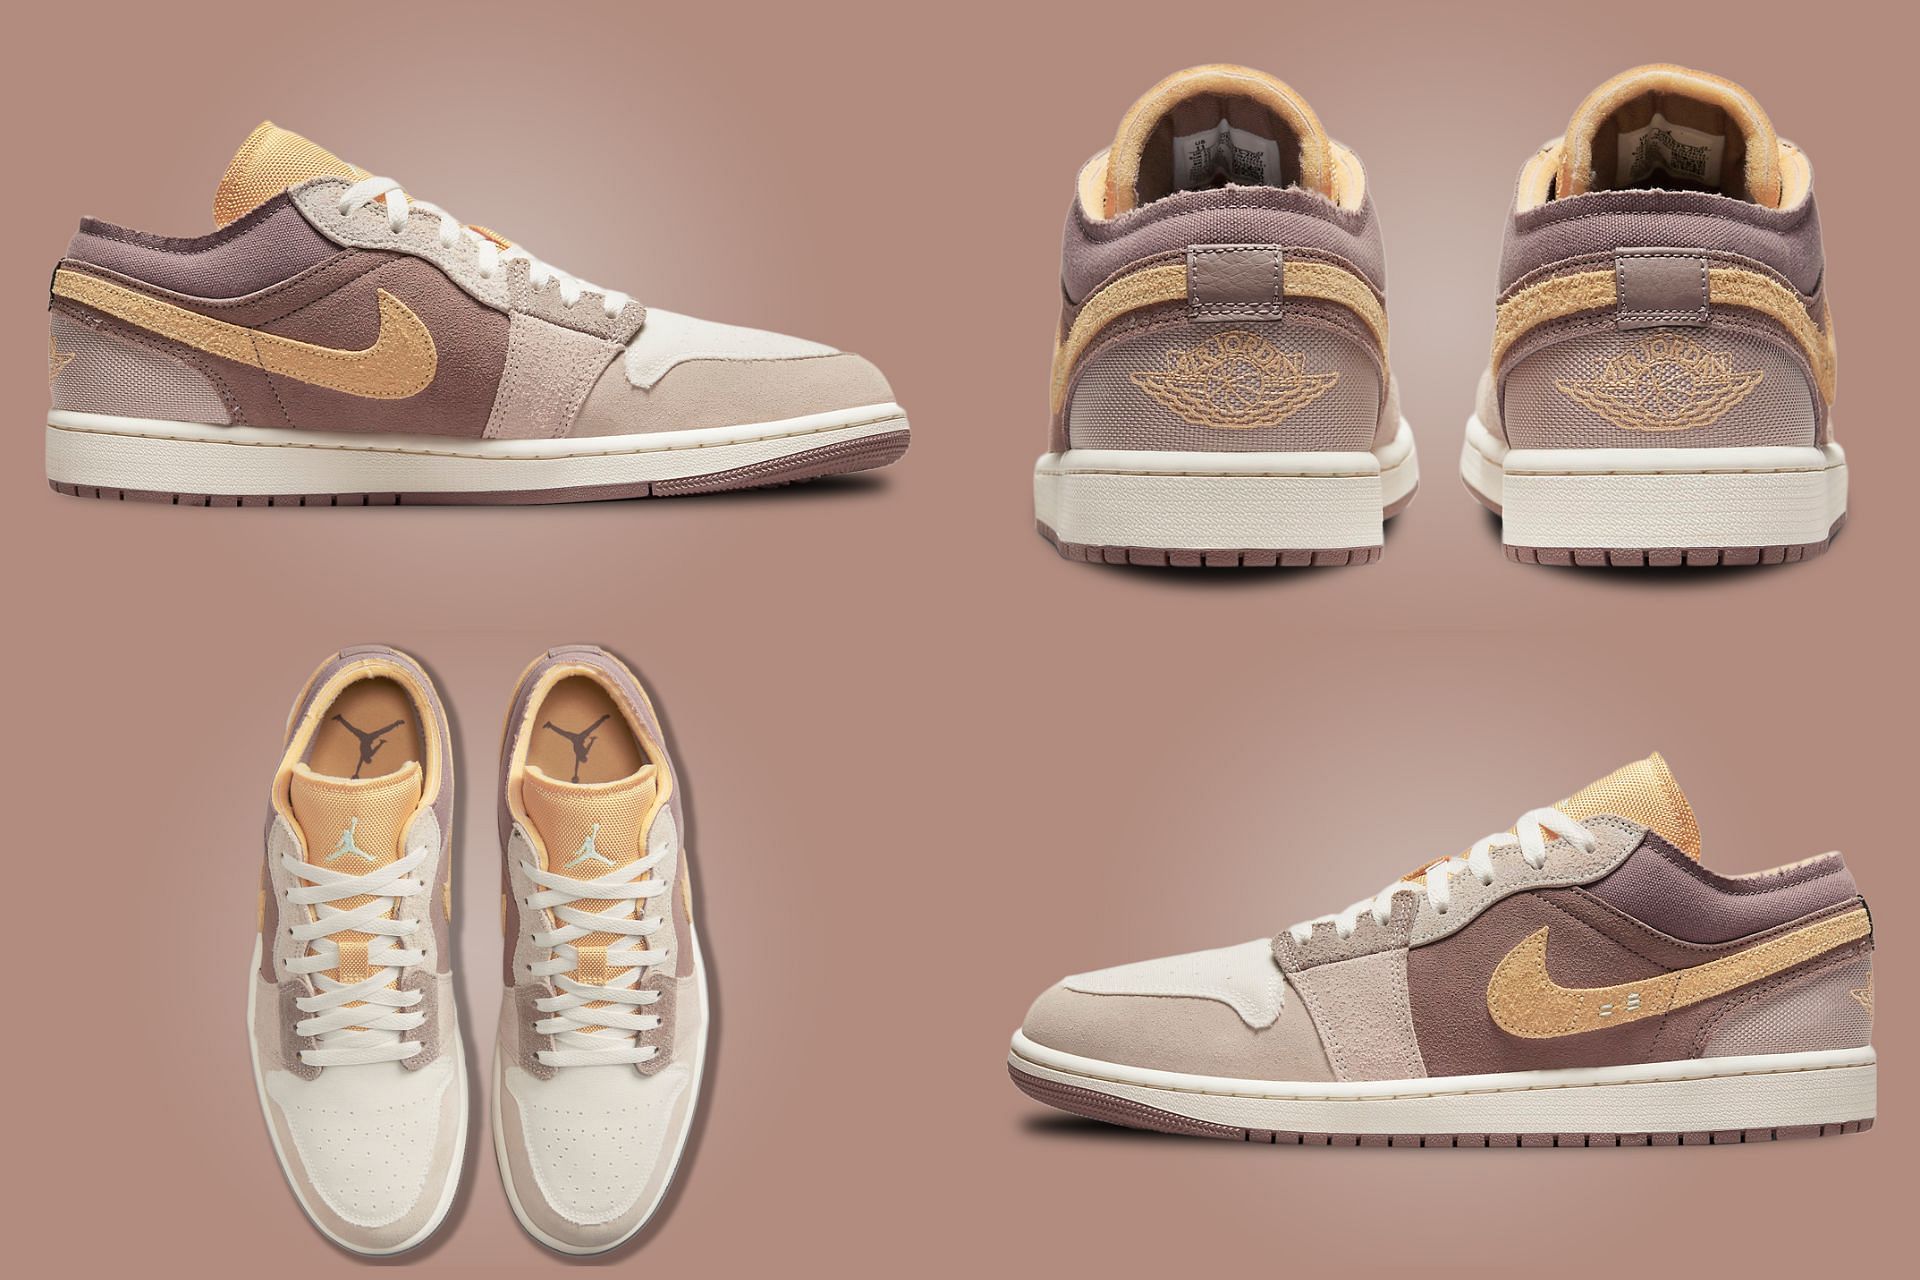 The upcoming Nike Air Jordan 1 Low SE Craft &quot;Taupe Haze&quot; sneakers are clad in earthy tones in a deconstructed aesthetic (Image via Sportskeeda)